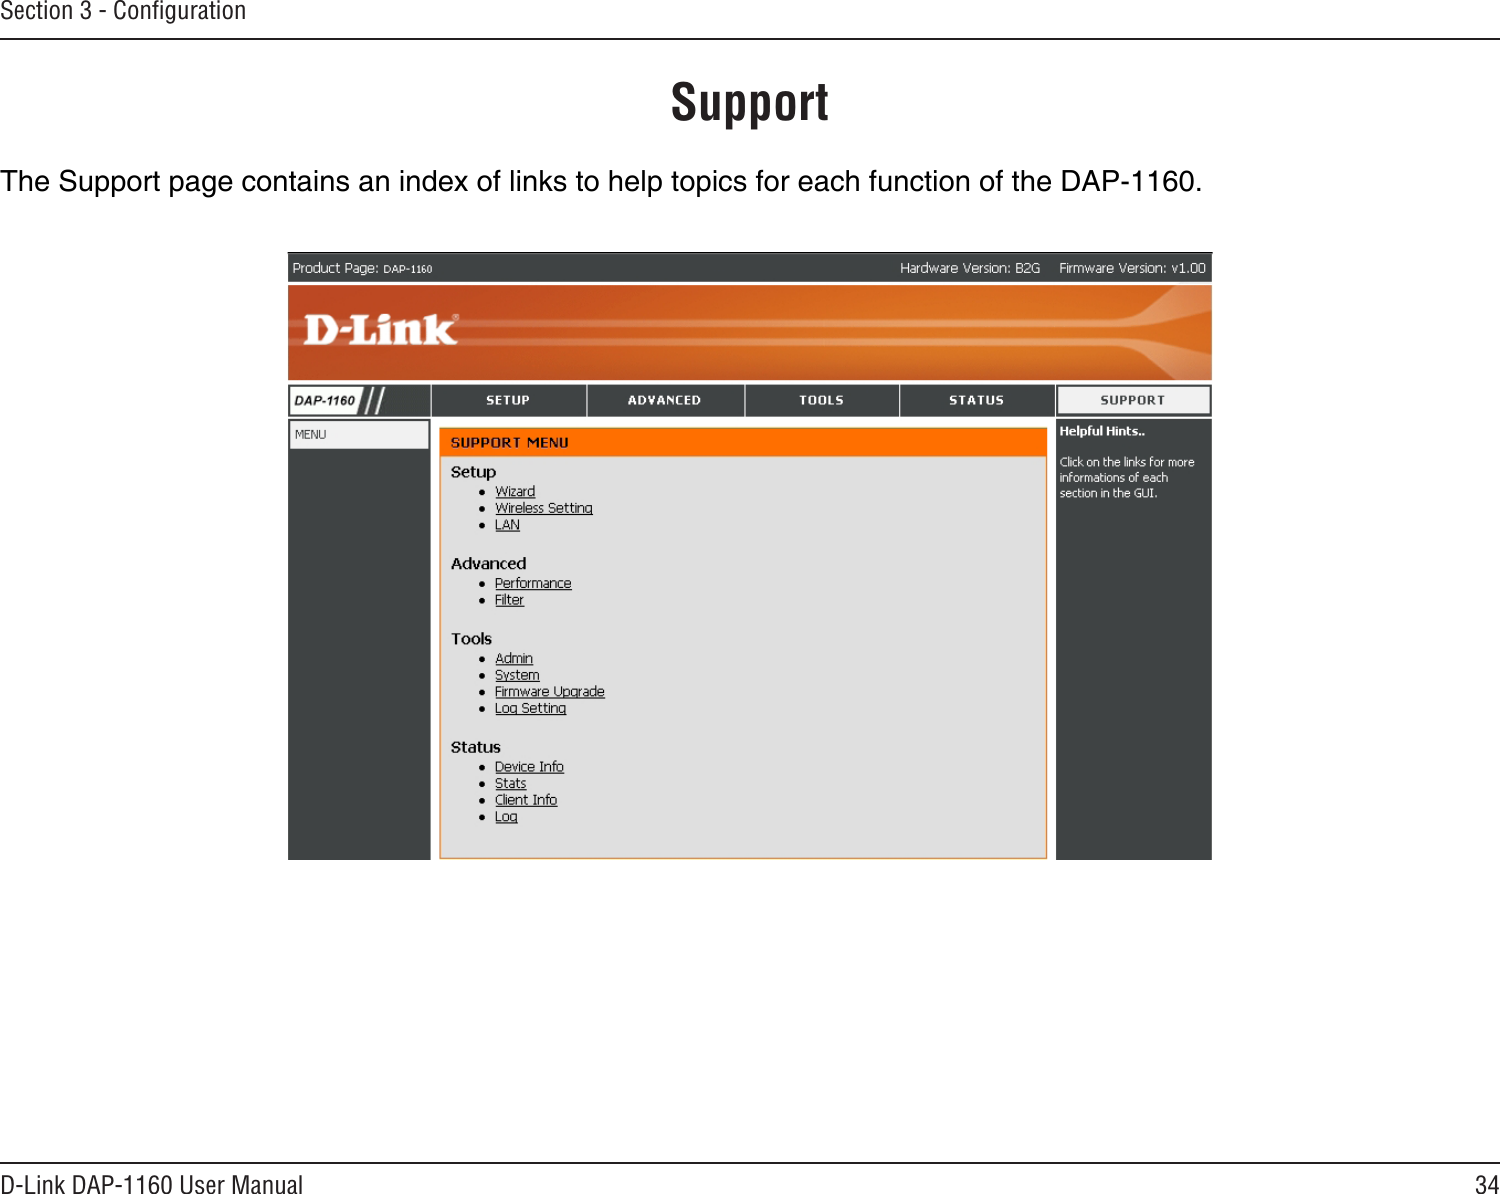 34D-Link DAP-1160 User ManualSection 3 - ConﬁgurationSupportThe Support page contains an index of links to help topics for each function of the DAP-1160.